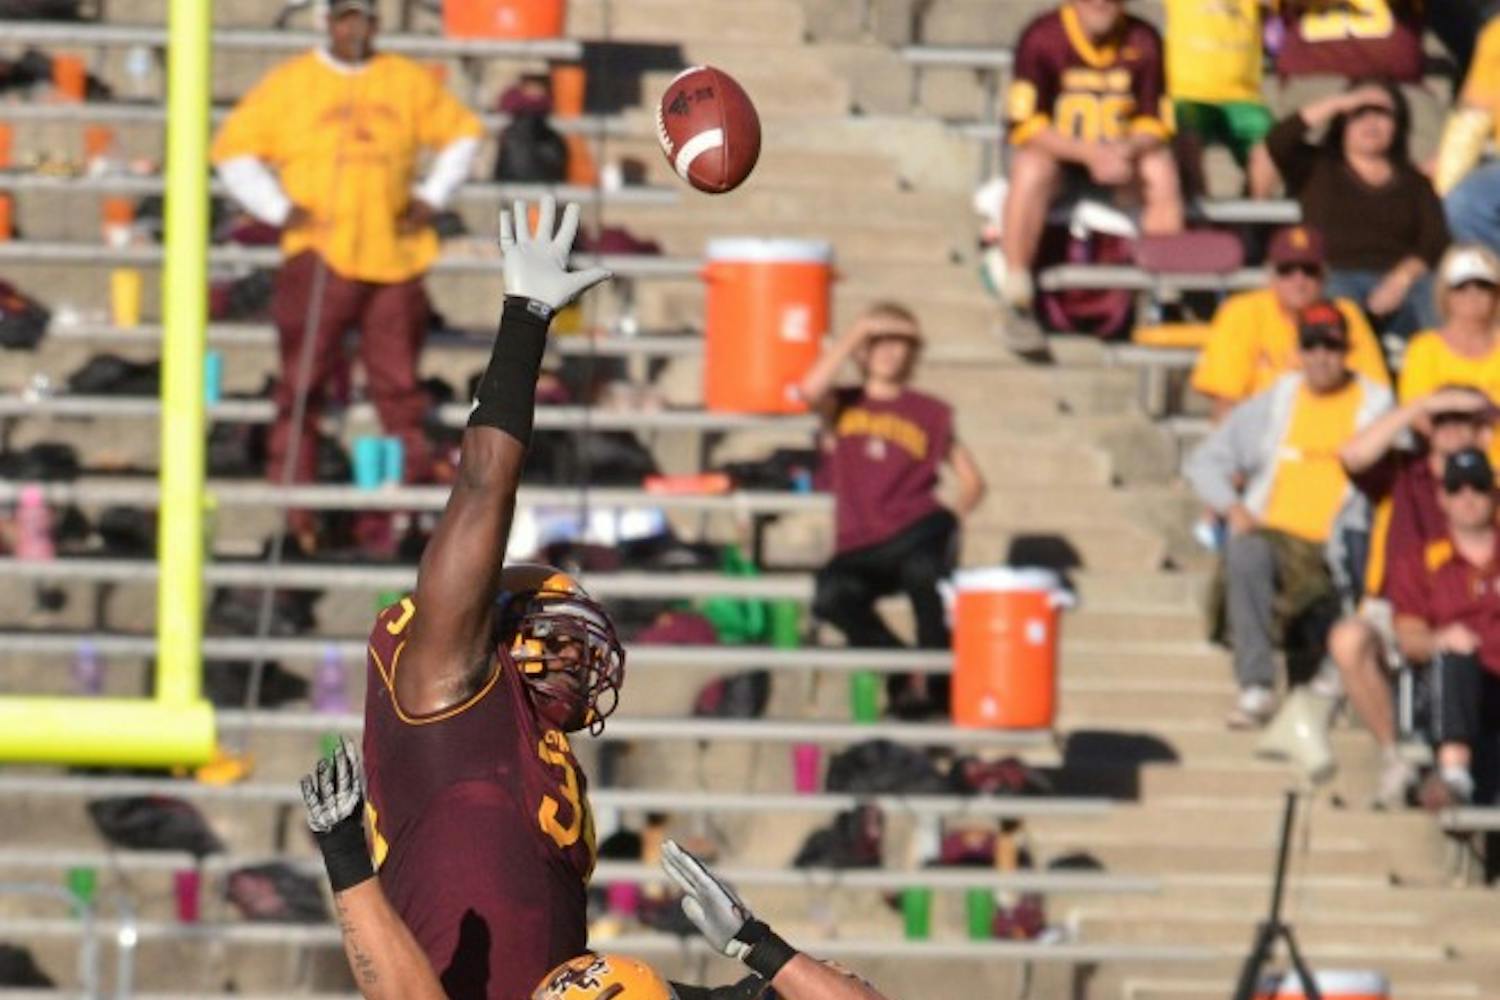 Saying farewell: ASU senior defensive end James Brooks reaches to block a field goal attempt during the Sun Devils’ 55-34 win over UCLA in November. Brooks has decided to leave the team due to personal reasons. (Photo by Aaron Lavinsky)